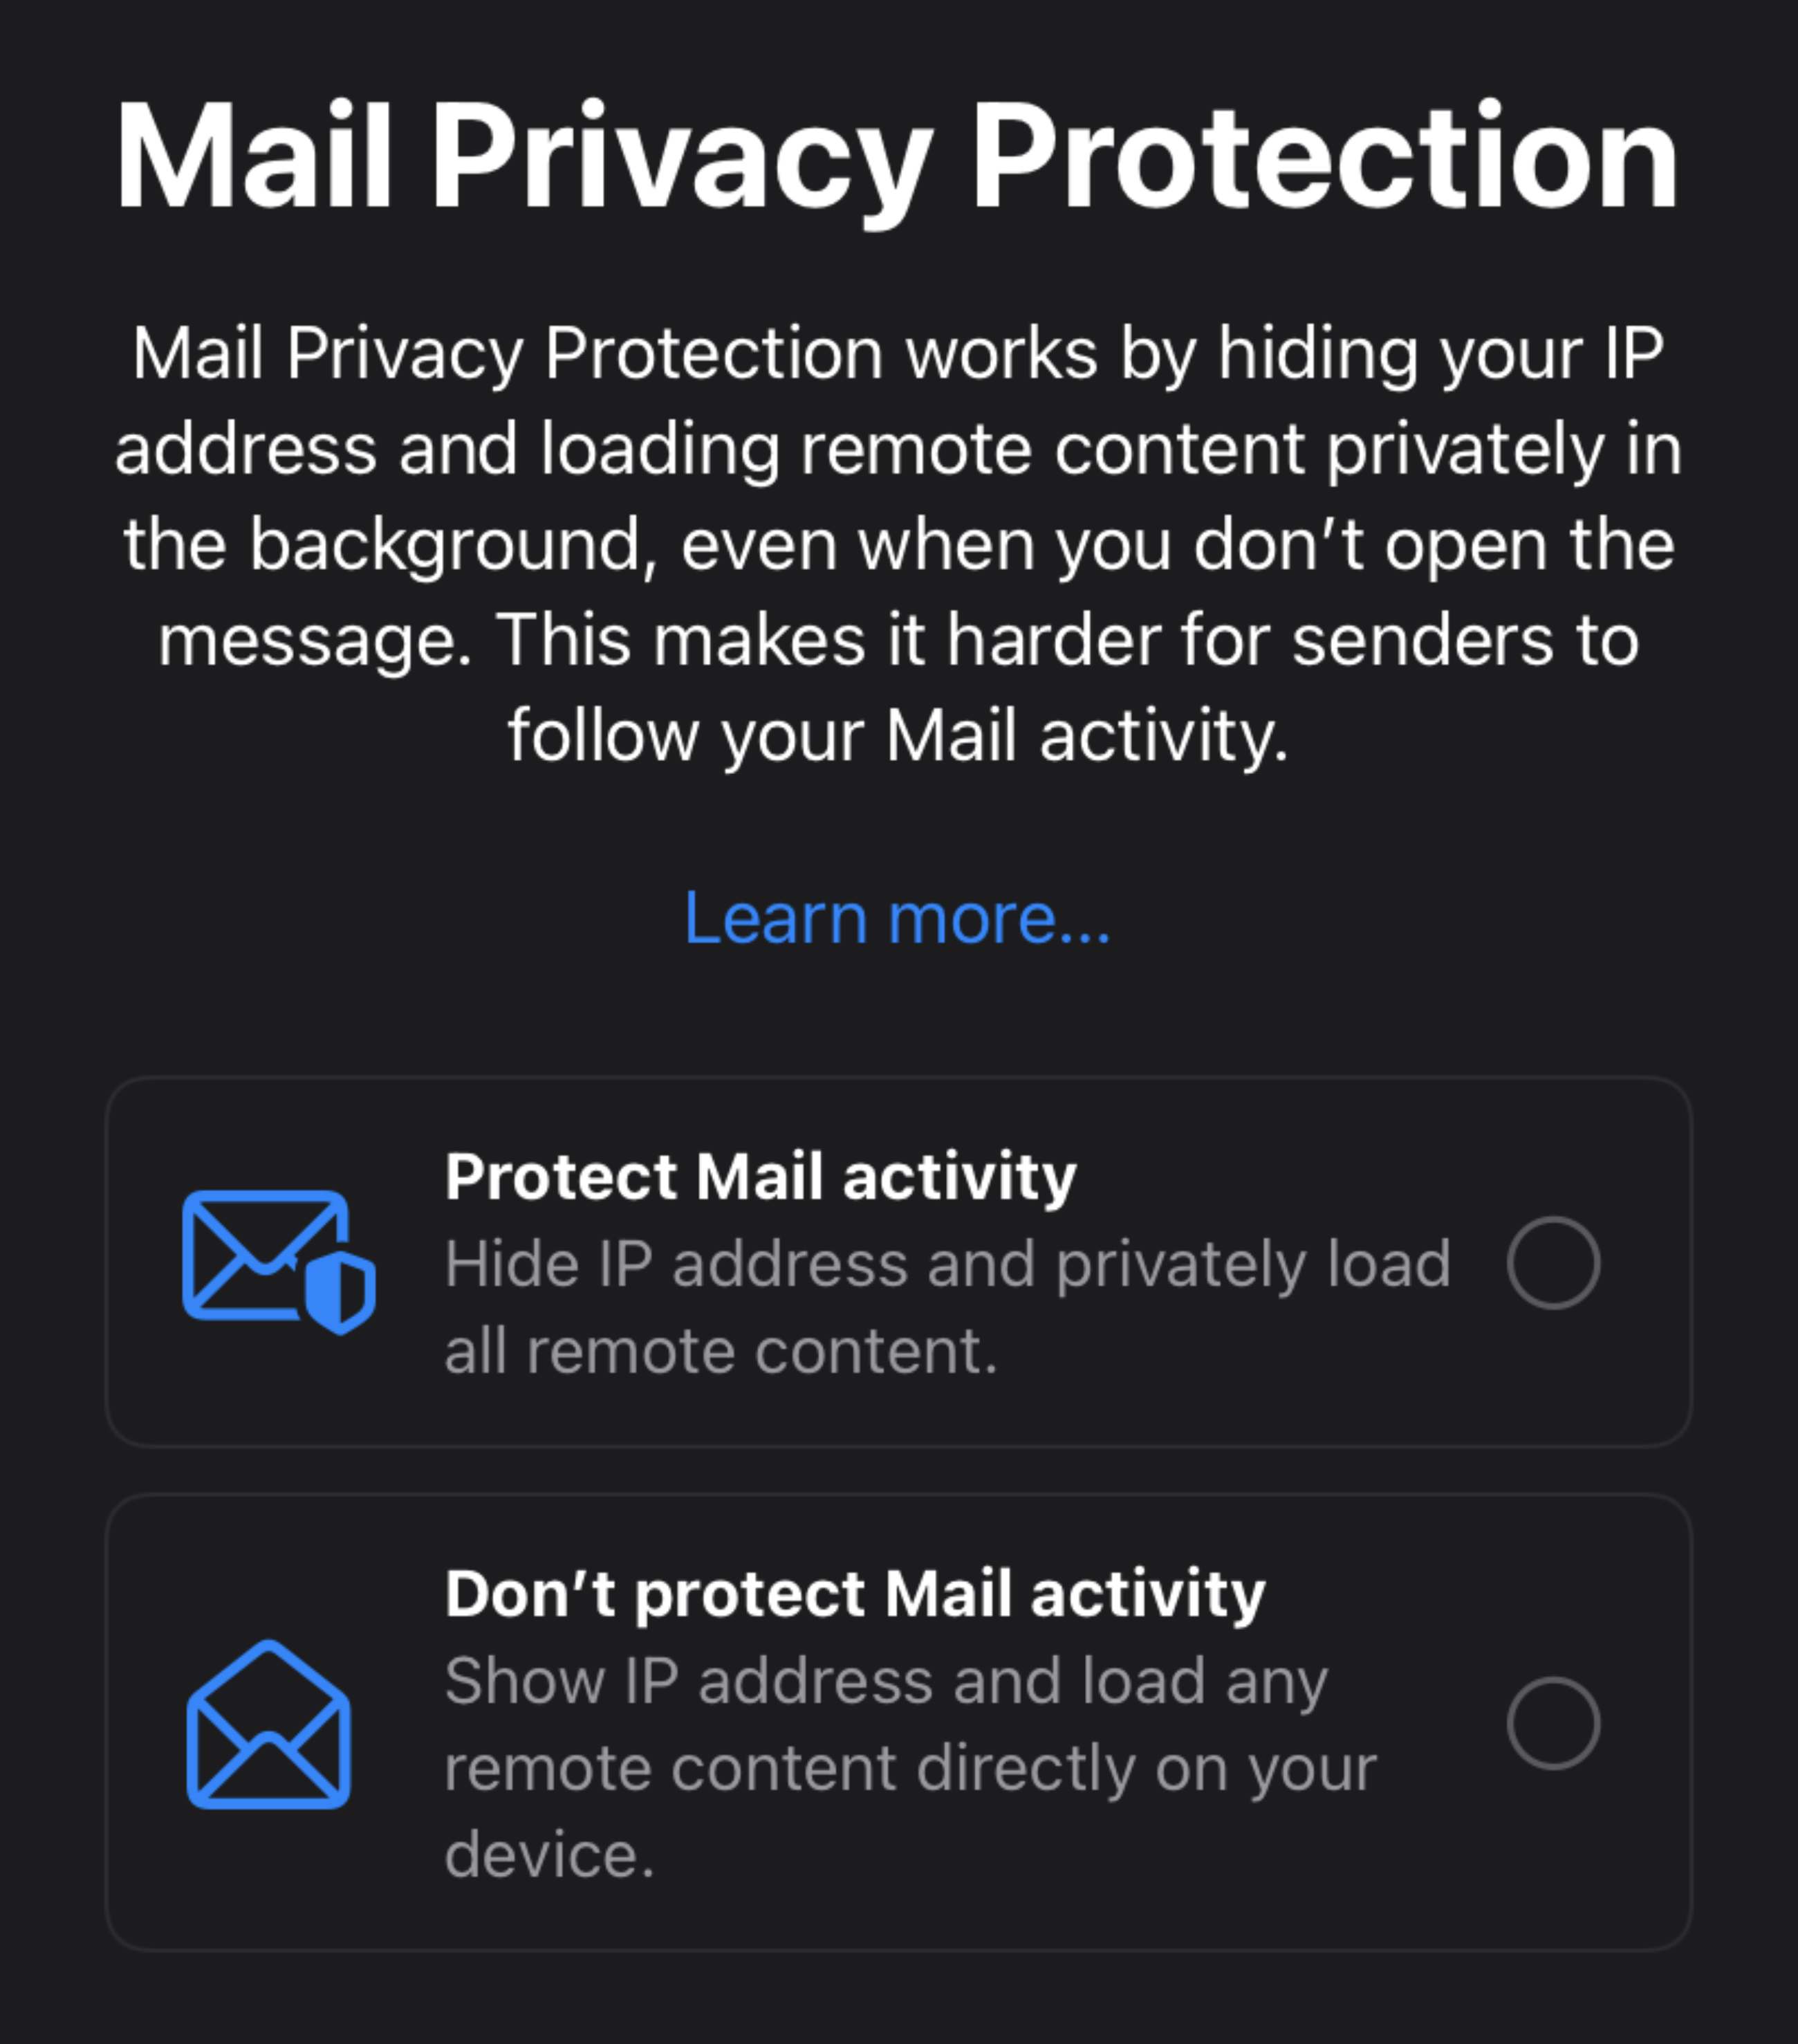 Apple Mail privacy prompt with option to protect mail activity or not